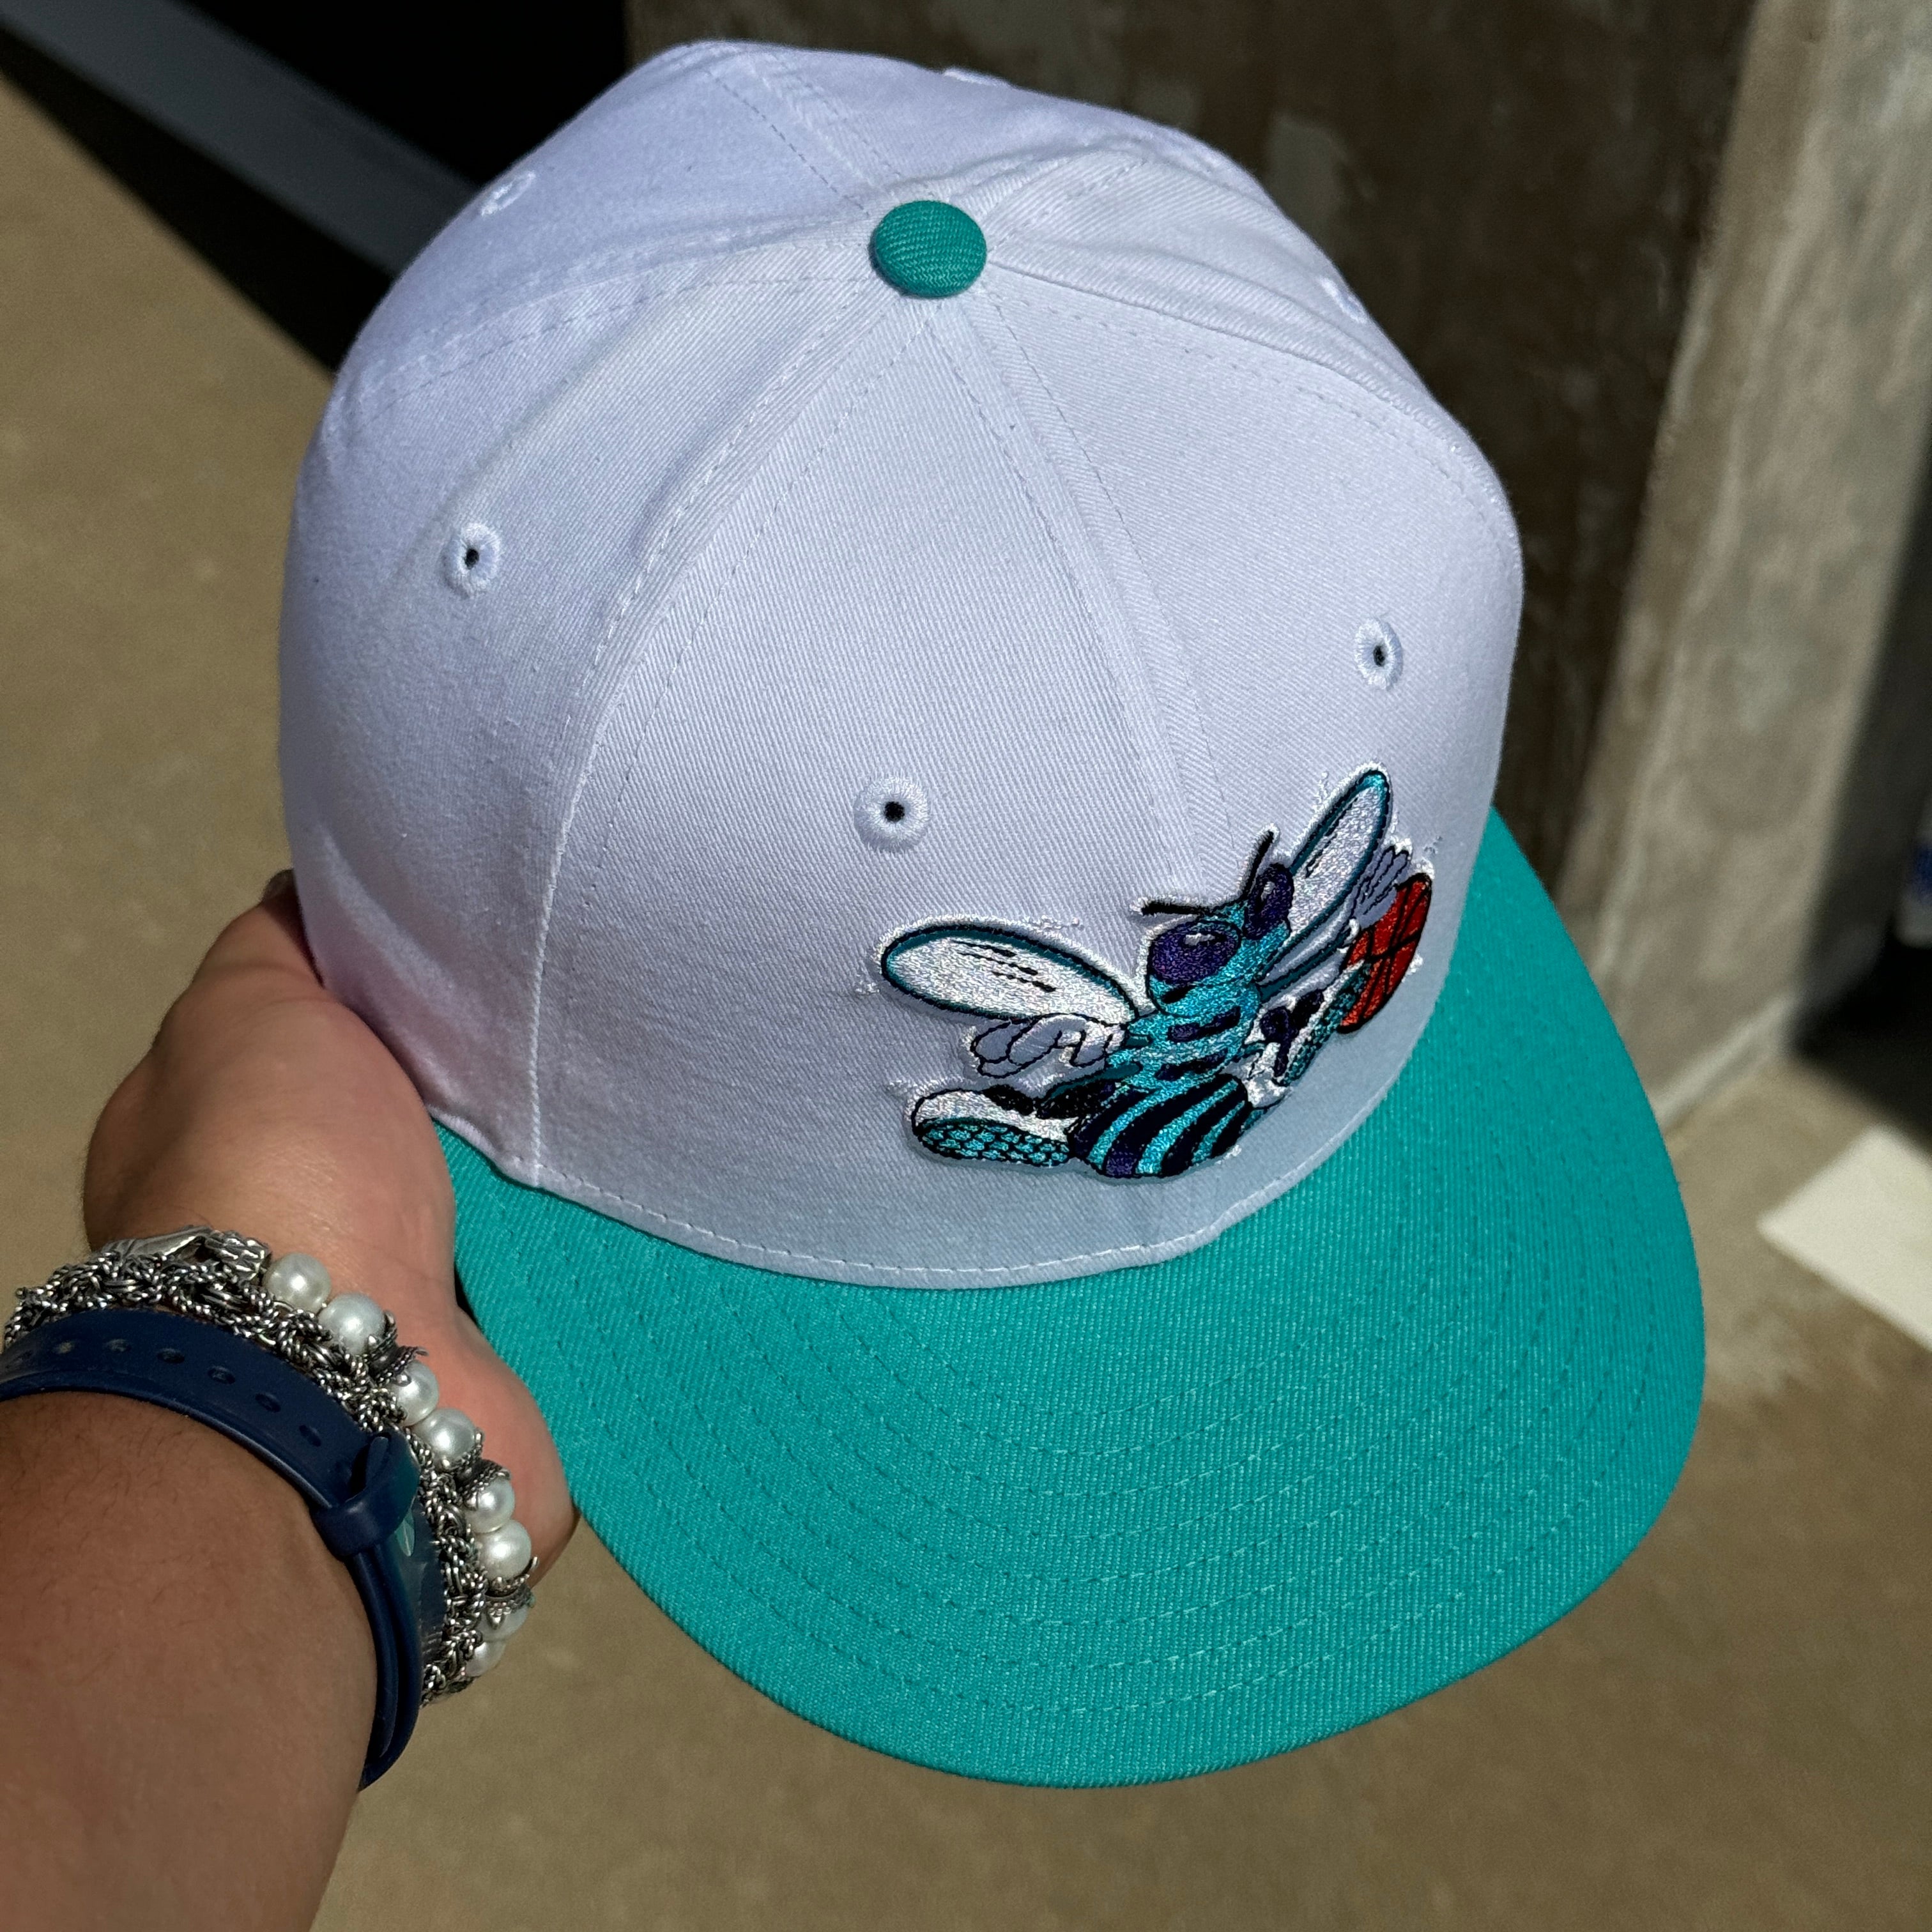 USED 1/8 White Charlotte Hornets Clean Simple NBA 59fifty New Era Fitted Hat Cap